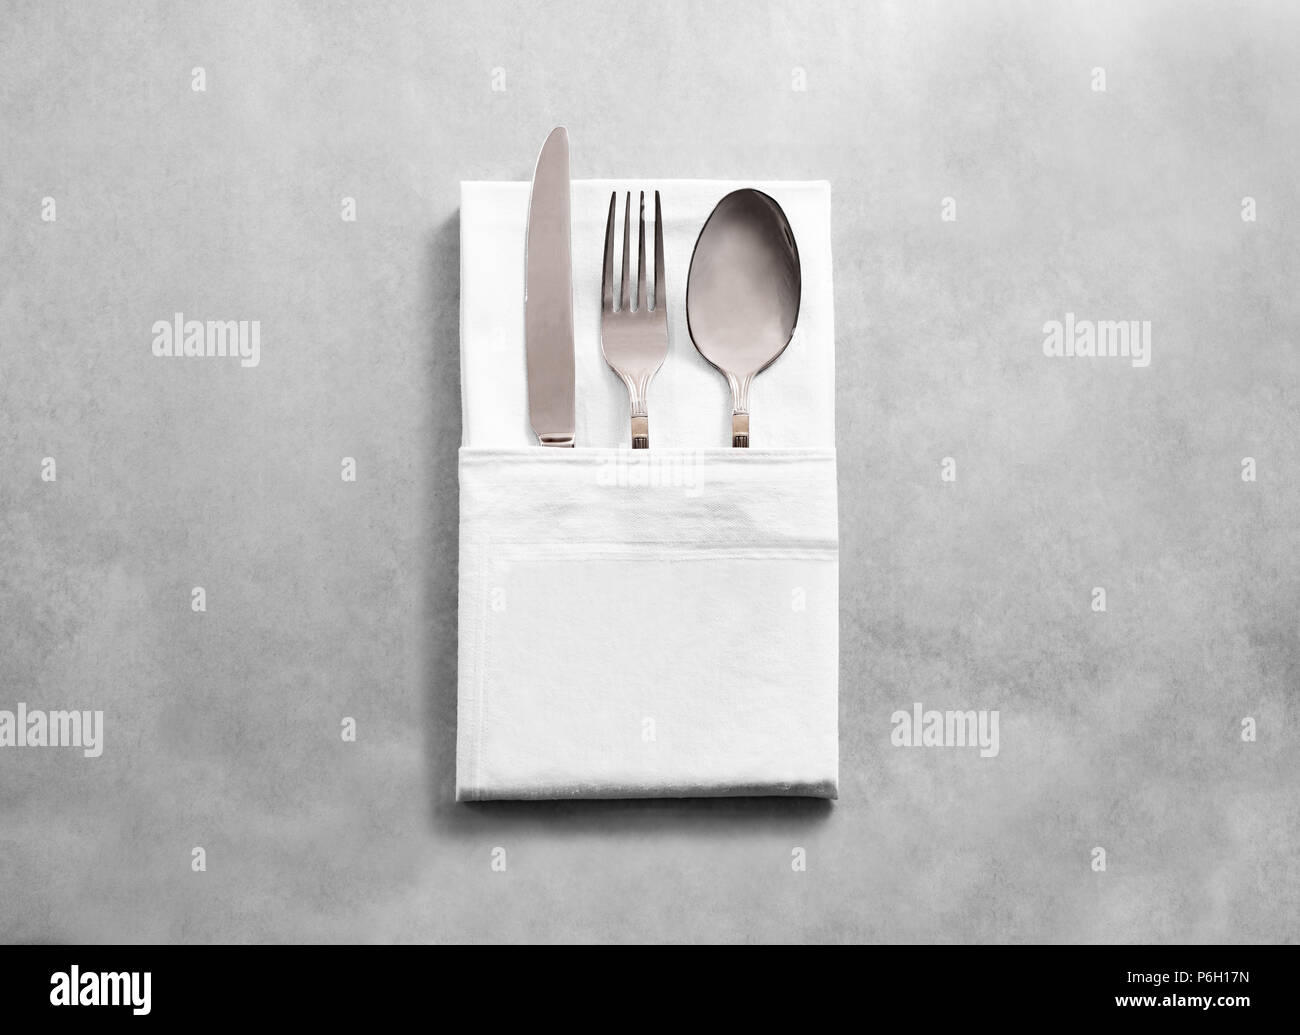 Blank white restaurant cloth napkin mockup with silver cutlery set, isolated. Knife fork and spoon in clear textile towel mock up template. Cafe branding identity clean napkin surface for logo design. Stock Photo